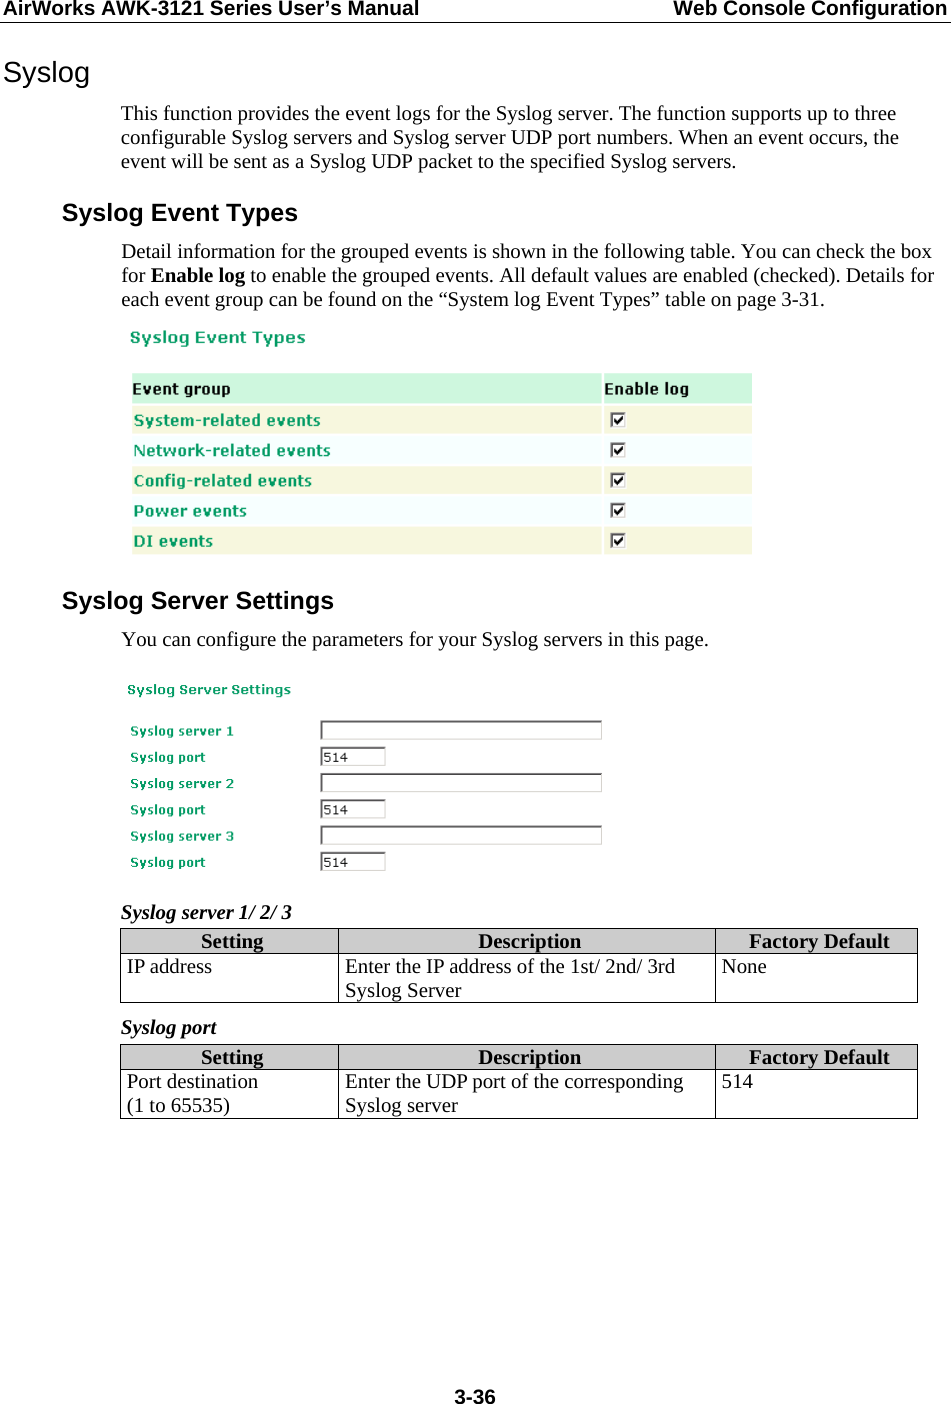 AirWorks AWK-3121 Series User’s Manual  Web Console Configuration  3-36Syslog This function provides the event logs for the Syslog server. The function supports up to three configurable Syslog servers and Syslog server UDP port numbers. When an event occurs, the event will be sent as a Syslog UDP packet to the specified Syslog servers. Syslog Event Types Detail information for the grouped events is shown in the following table. You can check the box for Enable log to enable the grouped events. All default values are enabled (checked). Details for each event group can be found on the “System log Event Types” table on page 3-31.  Syslog Server Settings You can configure the parameters for your Syslog servers in this page.   Syslog server 1/ 2/ 3 Setting  Description  Factory Default IP address  Enter the IP address of the 1st/ 2nd/ 3rd Syslog Server  None Syslog port Setting  Description  Factory Default Port destination   (1 to 65535)  Enter the UDP port of the corresponding Syslog server  514       